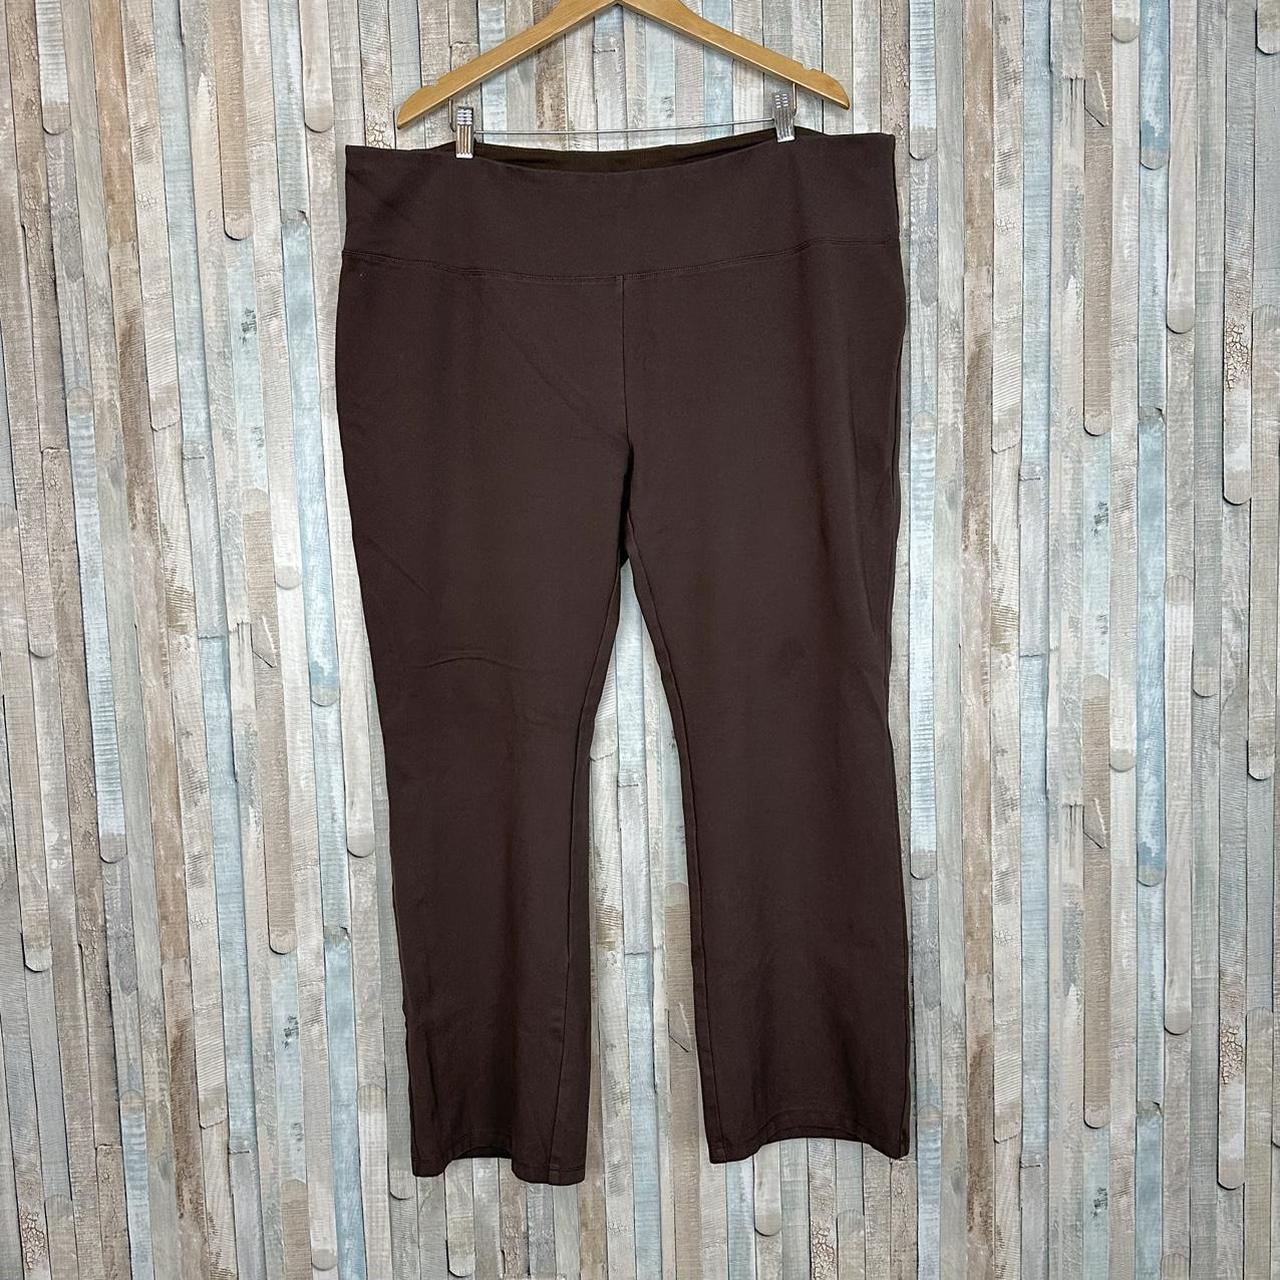 Pull on pants from Soft Surroundings in soft and - Depop